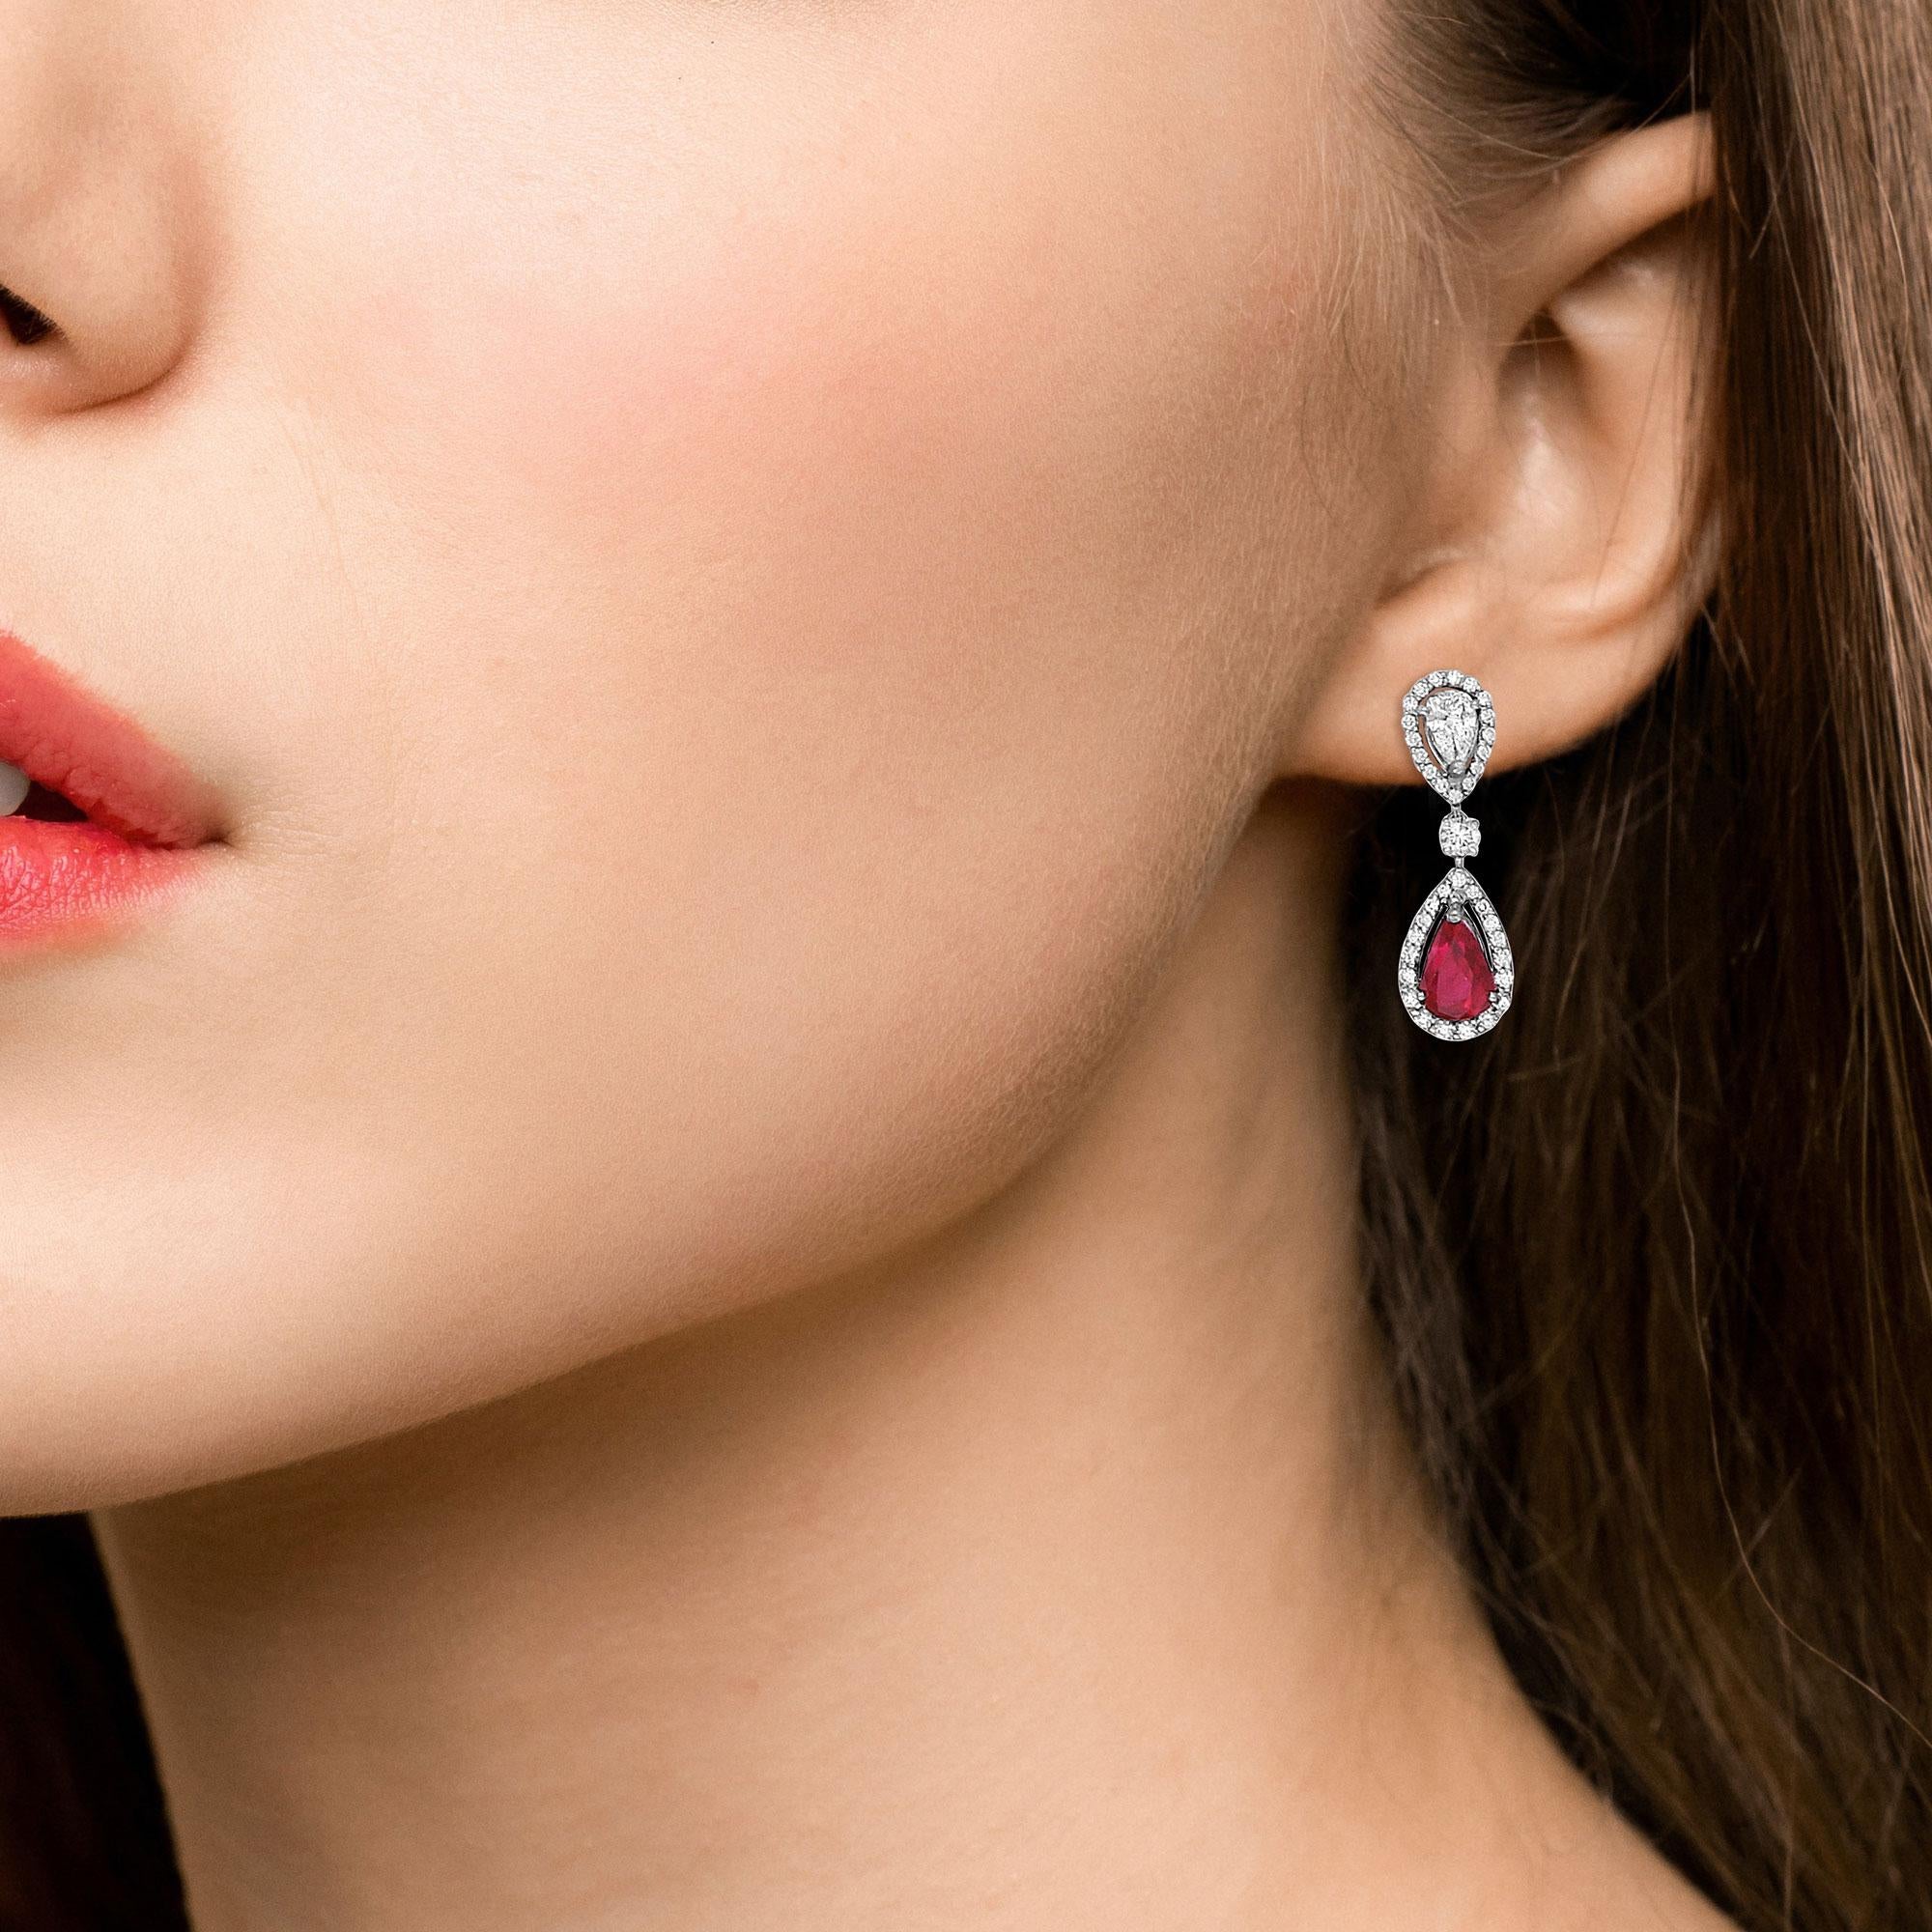 A stunning pair of diamond and ruby pear-shaped drop earrings set in platinum, signed and stamped Moussaieff.

Each earring is set with a singular pear shaped diamond haloed  by smaller round brilliant cut diamonds. Suspended underneath is a drop